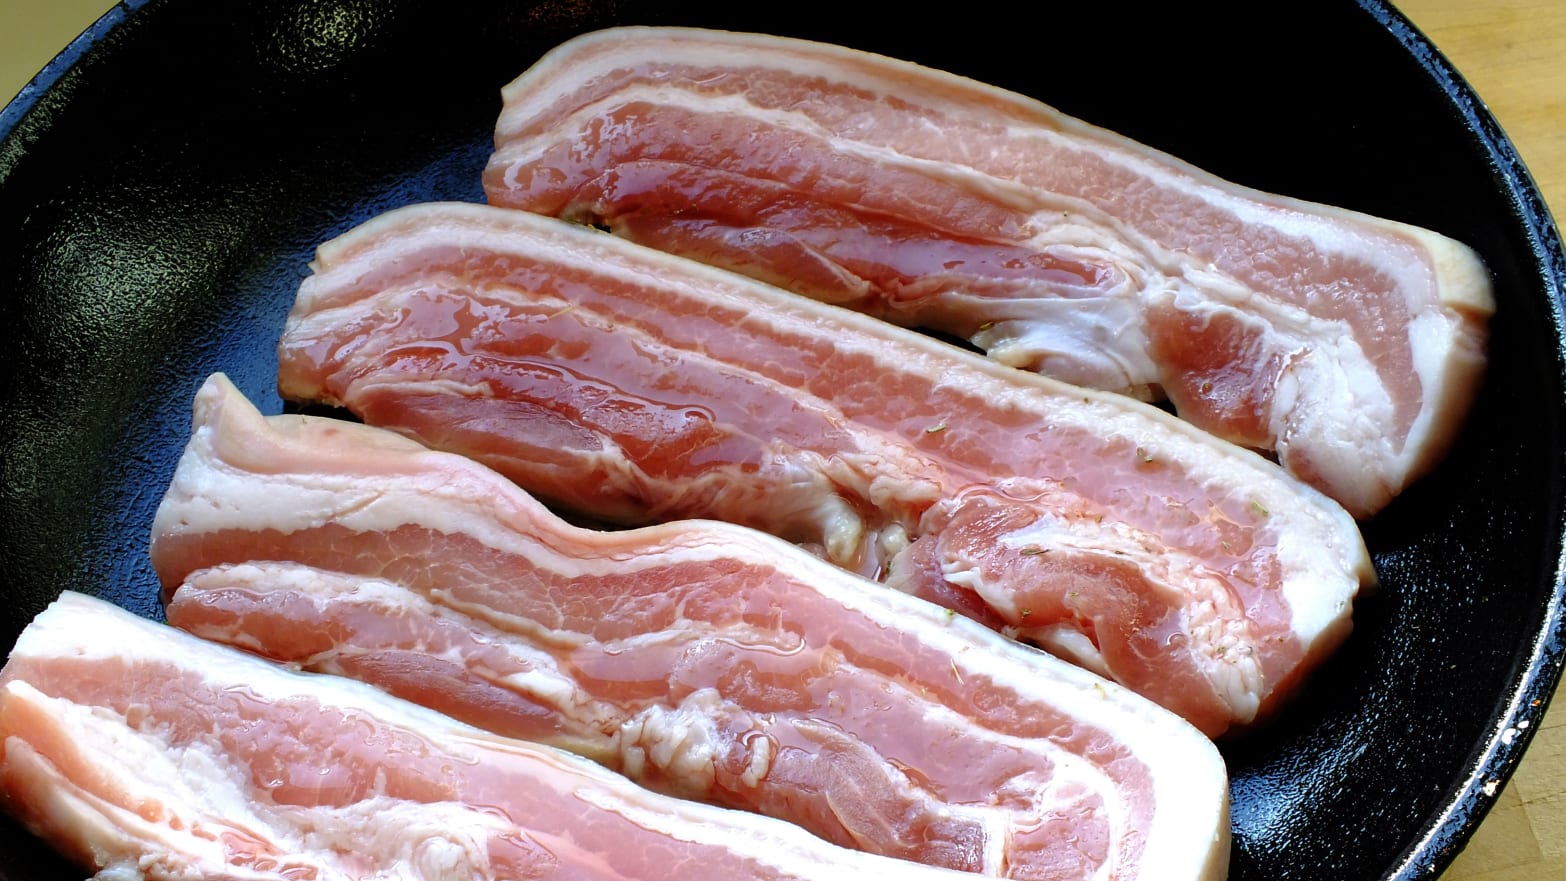 A panful of uncooked bacon.